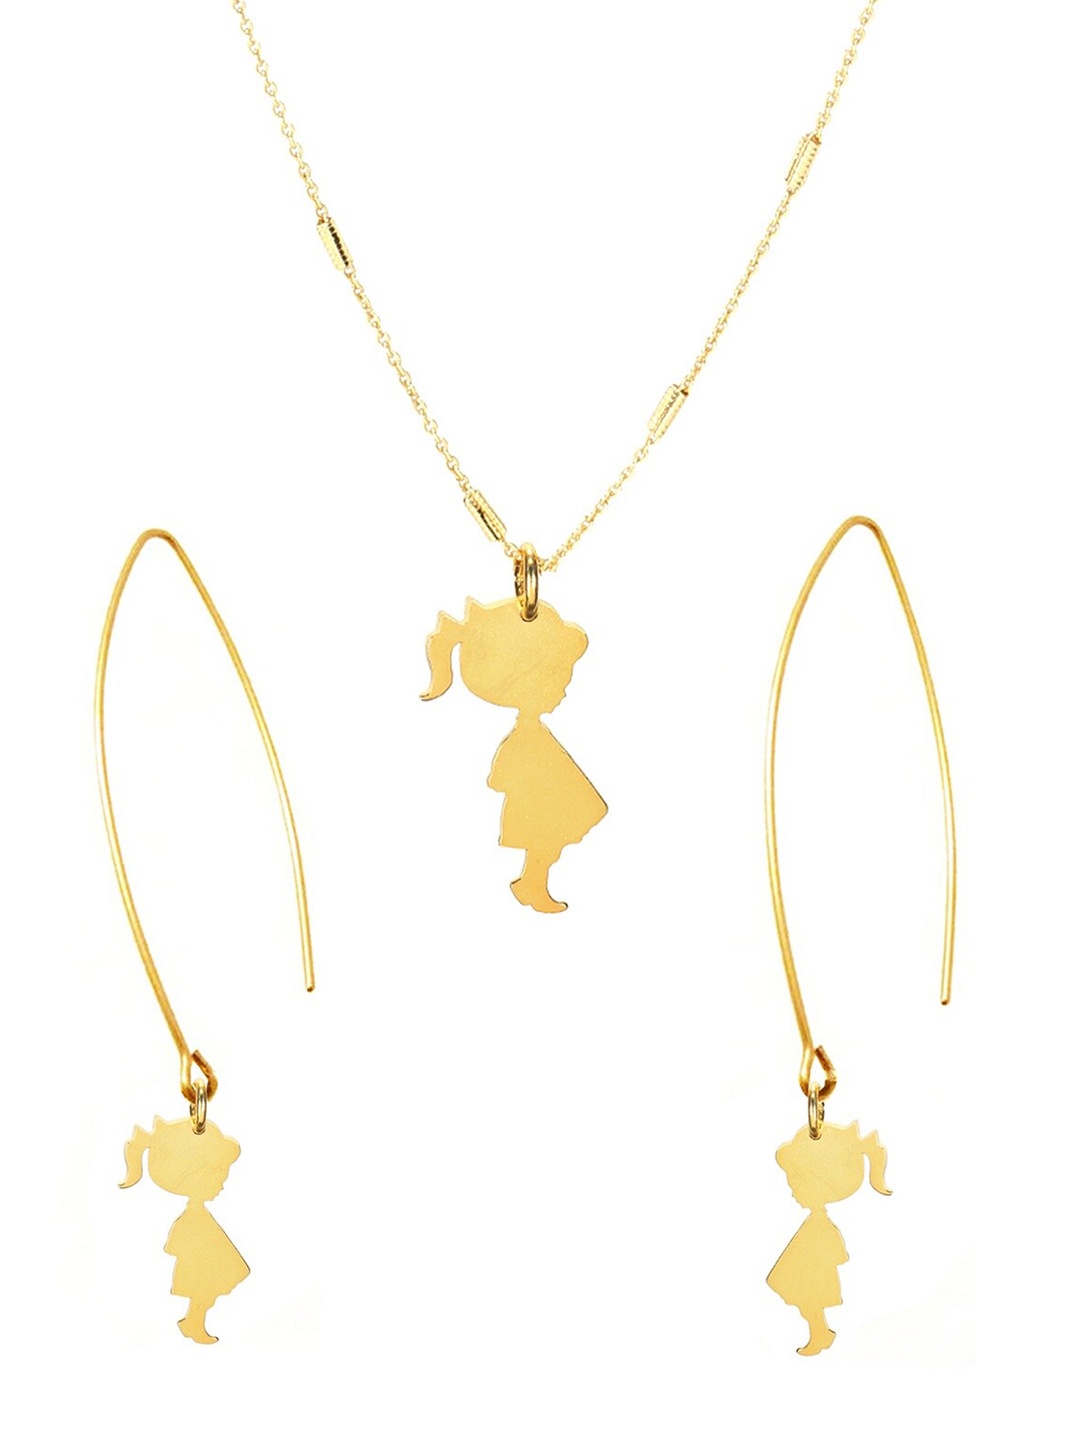 

Goldnera Pretty Girls Gold-Toned Charm Pendant and Earrings